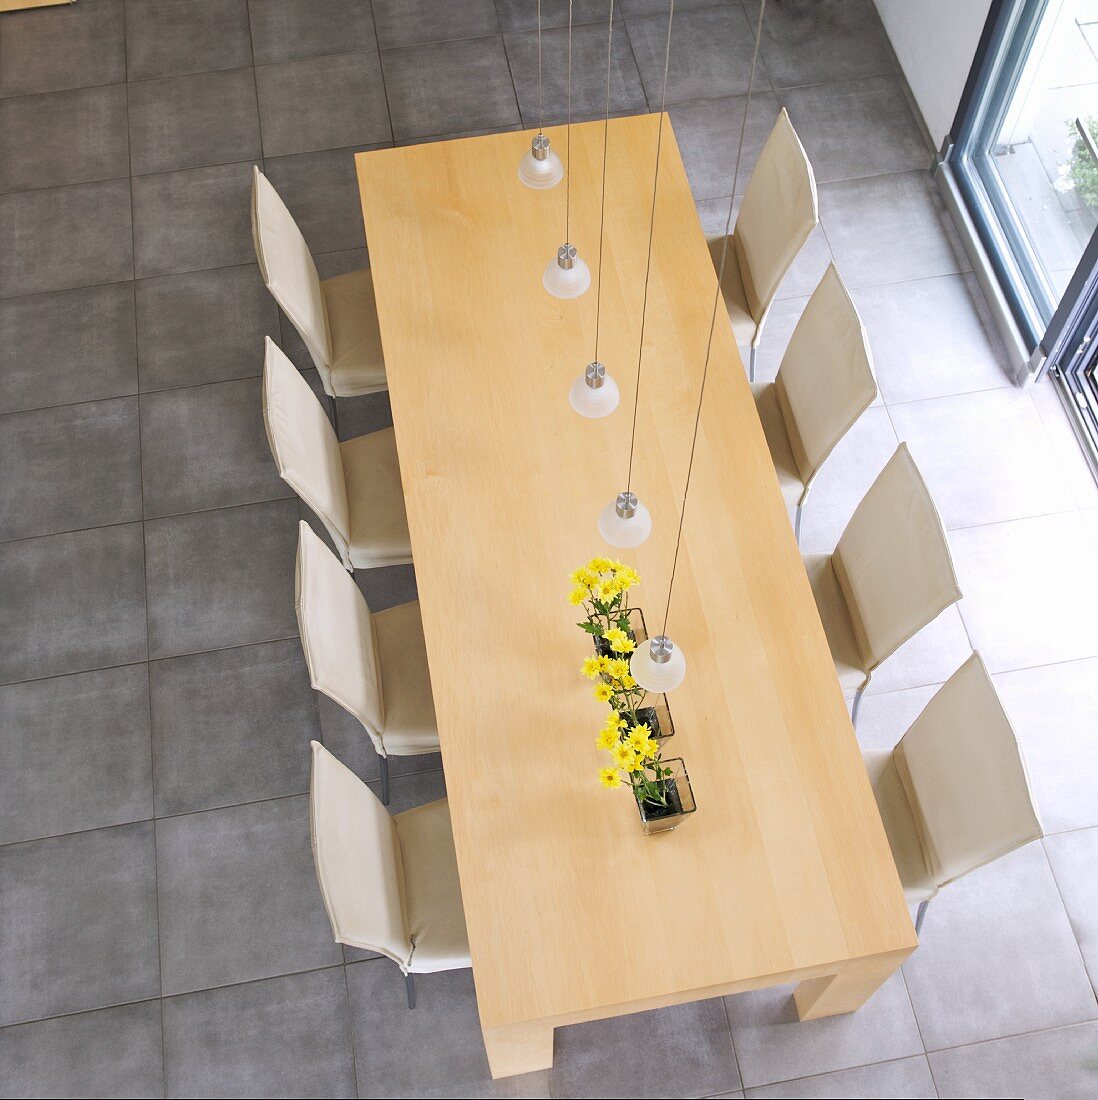 Top view of wooden dining table and chairs with pale covers on light grey stone floor in minimalist setting